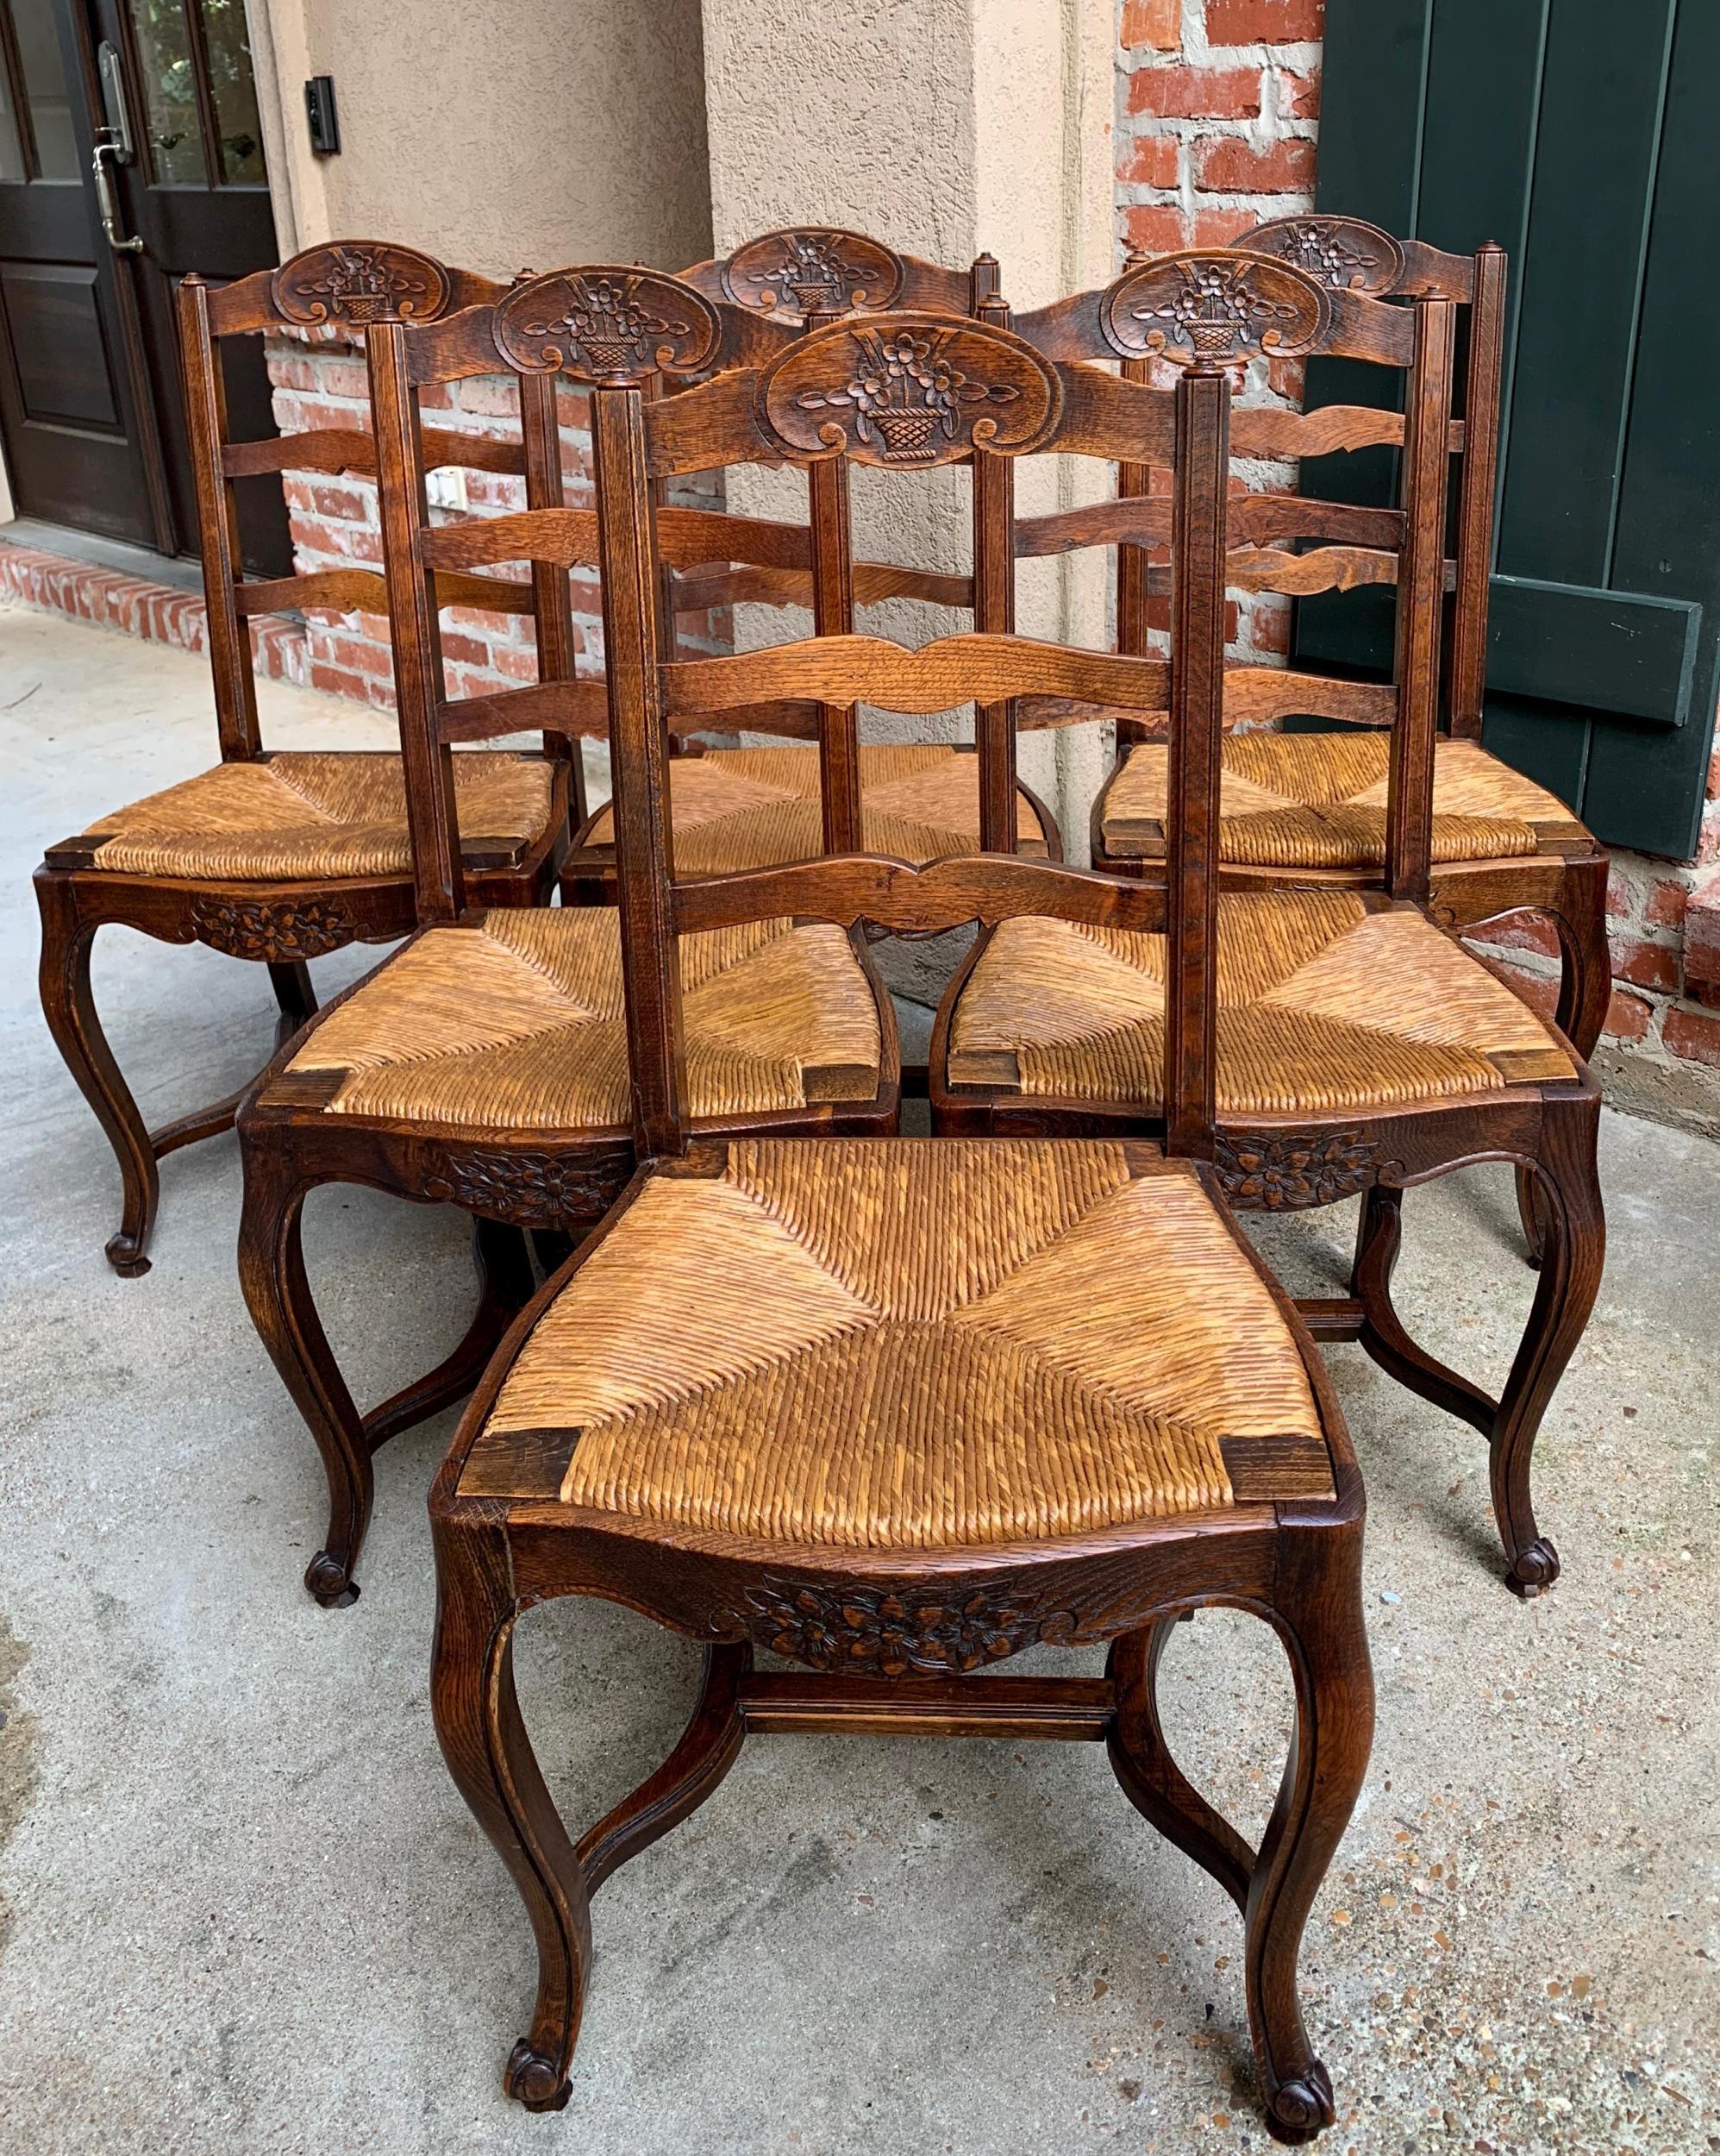 ~ Direct from France
~ Lovely set of 6 antique French chairs, with Classic French style, perfect for a kitchen or dining room with their original finish that compliments any decor!~
~ Serpentine ladder backs with a lovely silhouette; rail has a